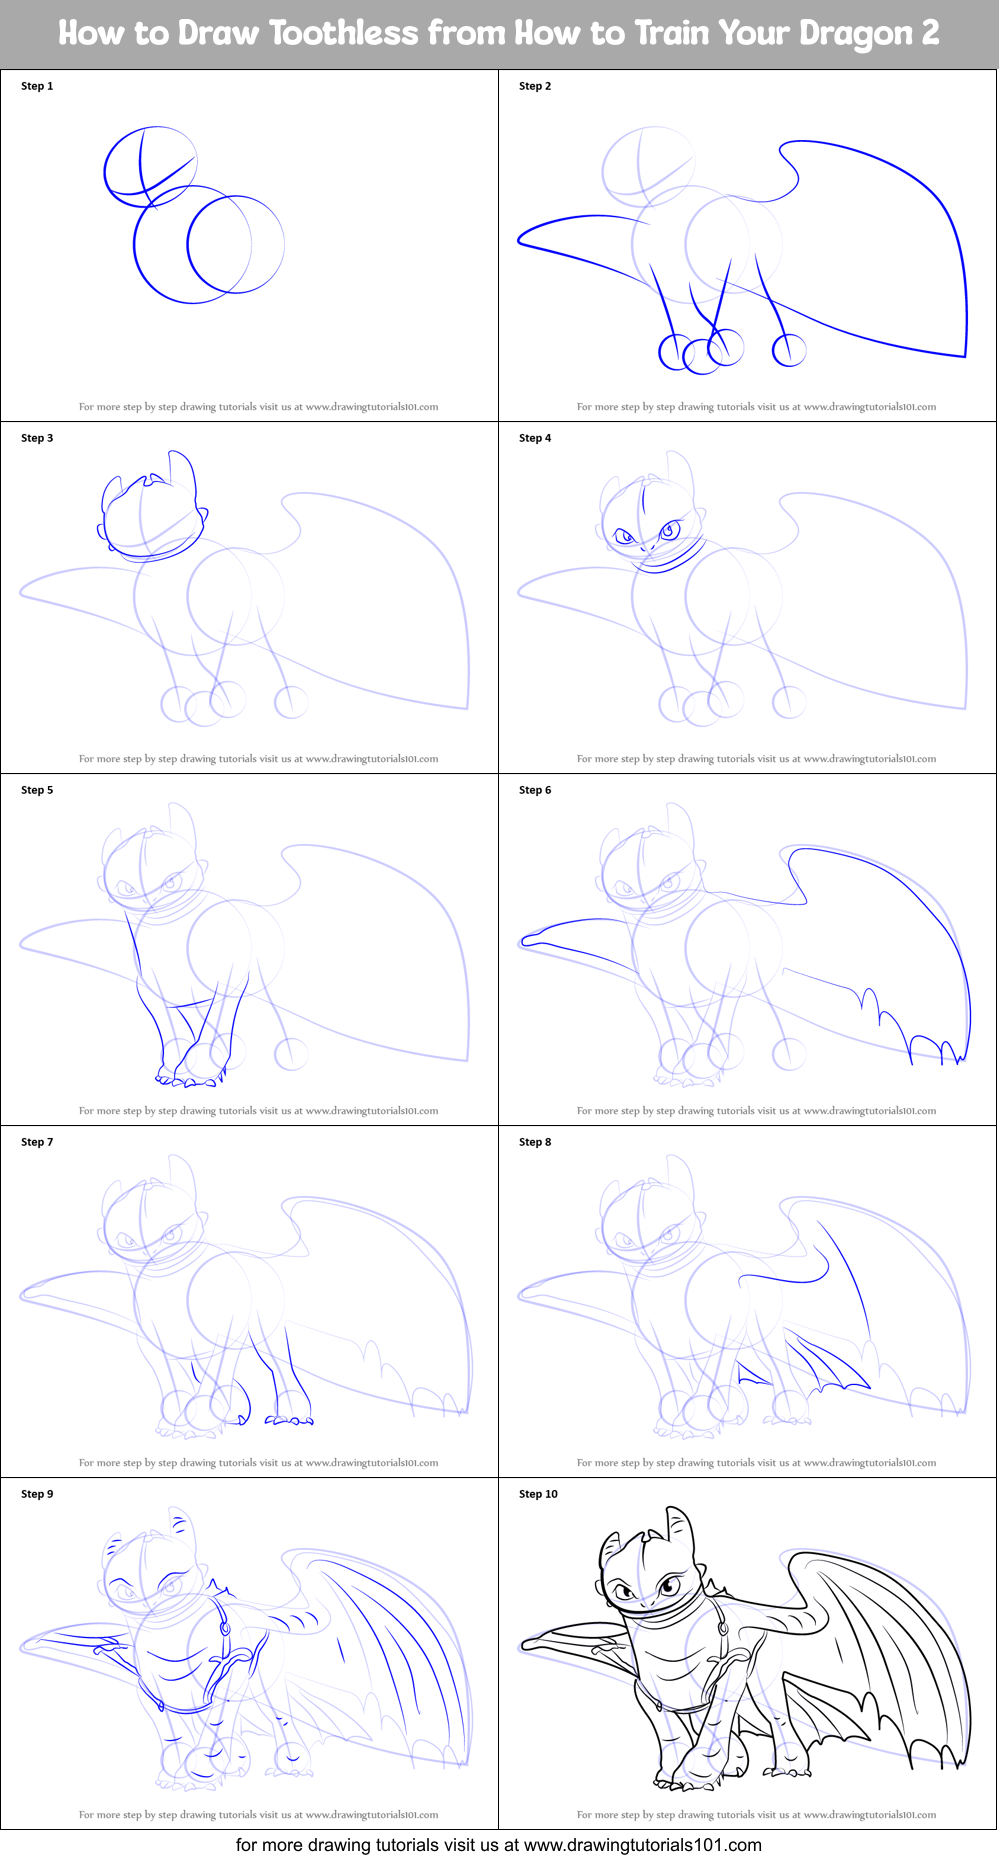 How to Draw Toothless from How to Train Your Dragon 2 (How to Train ...